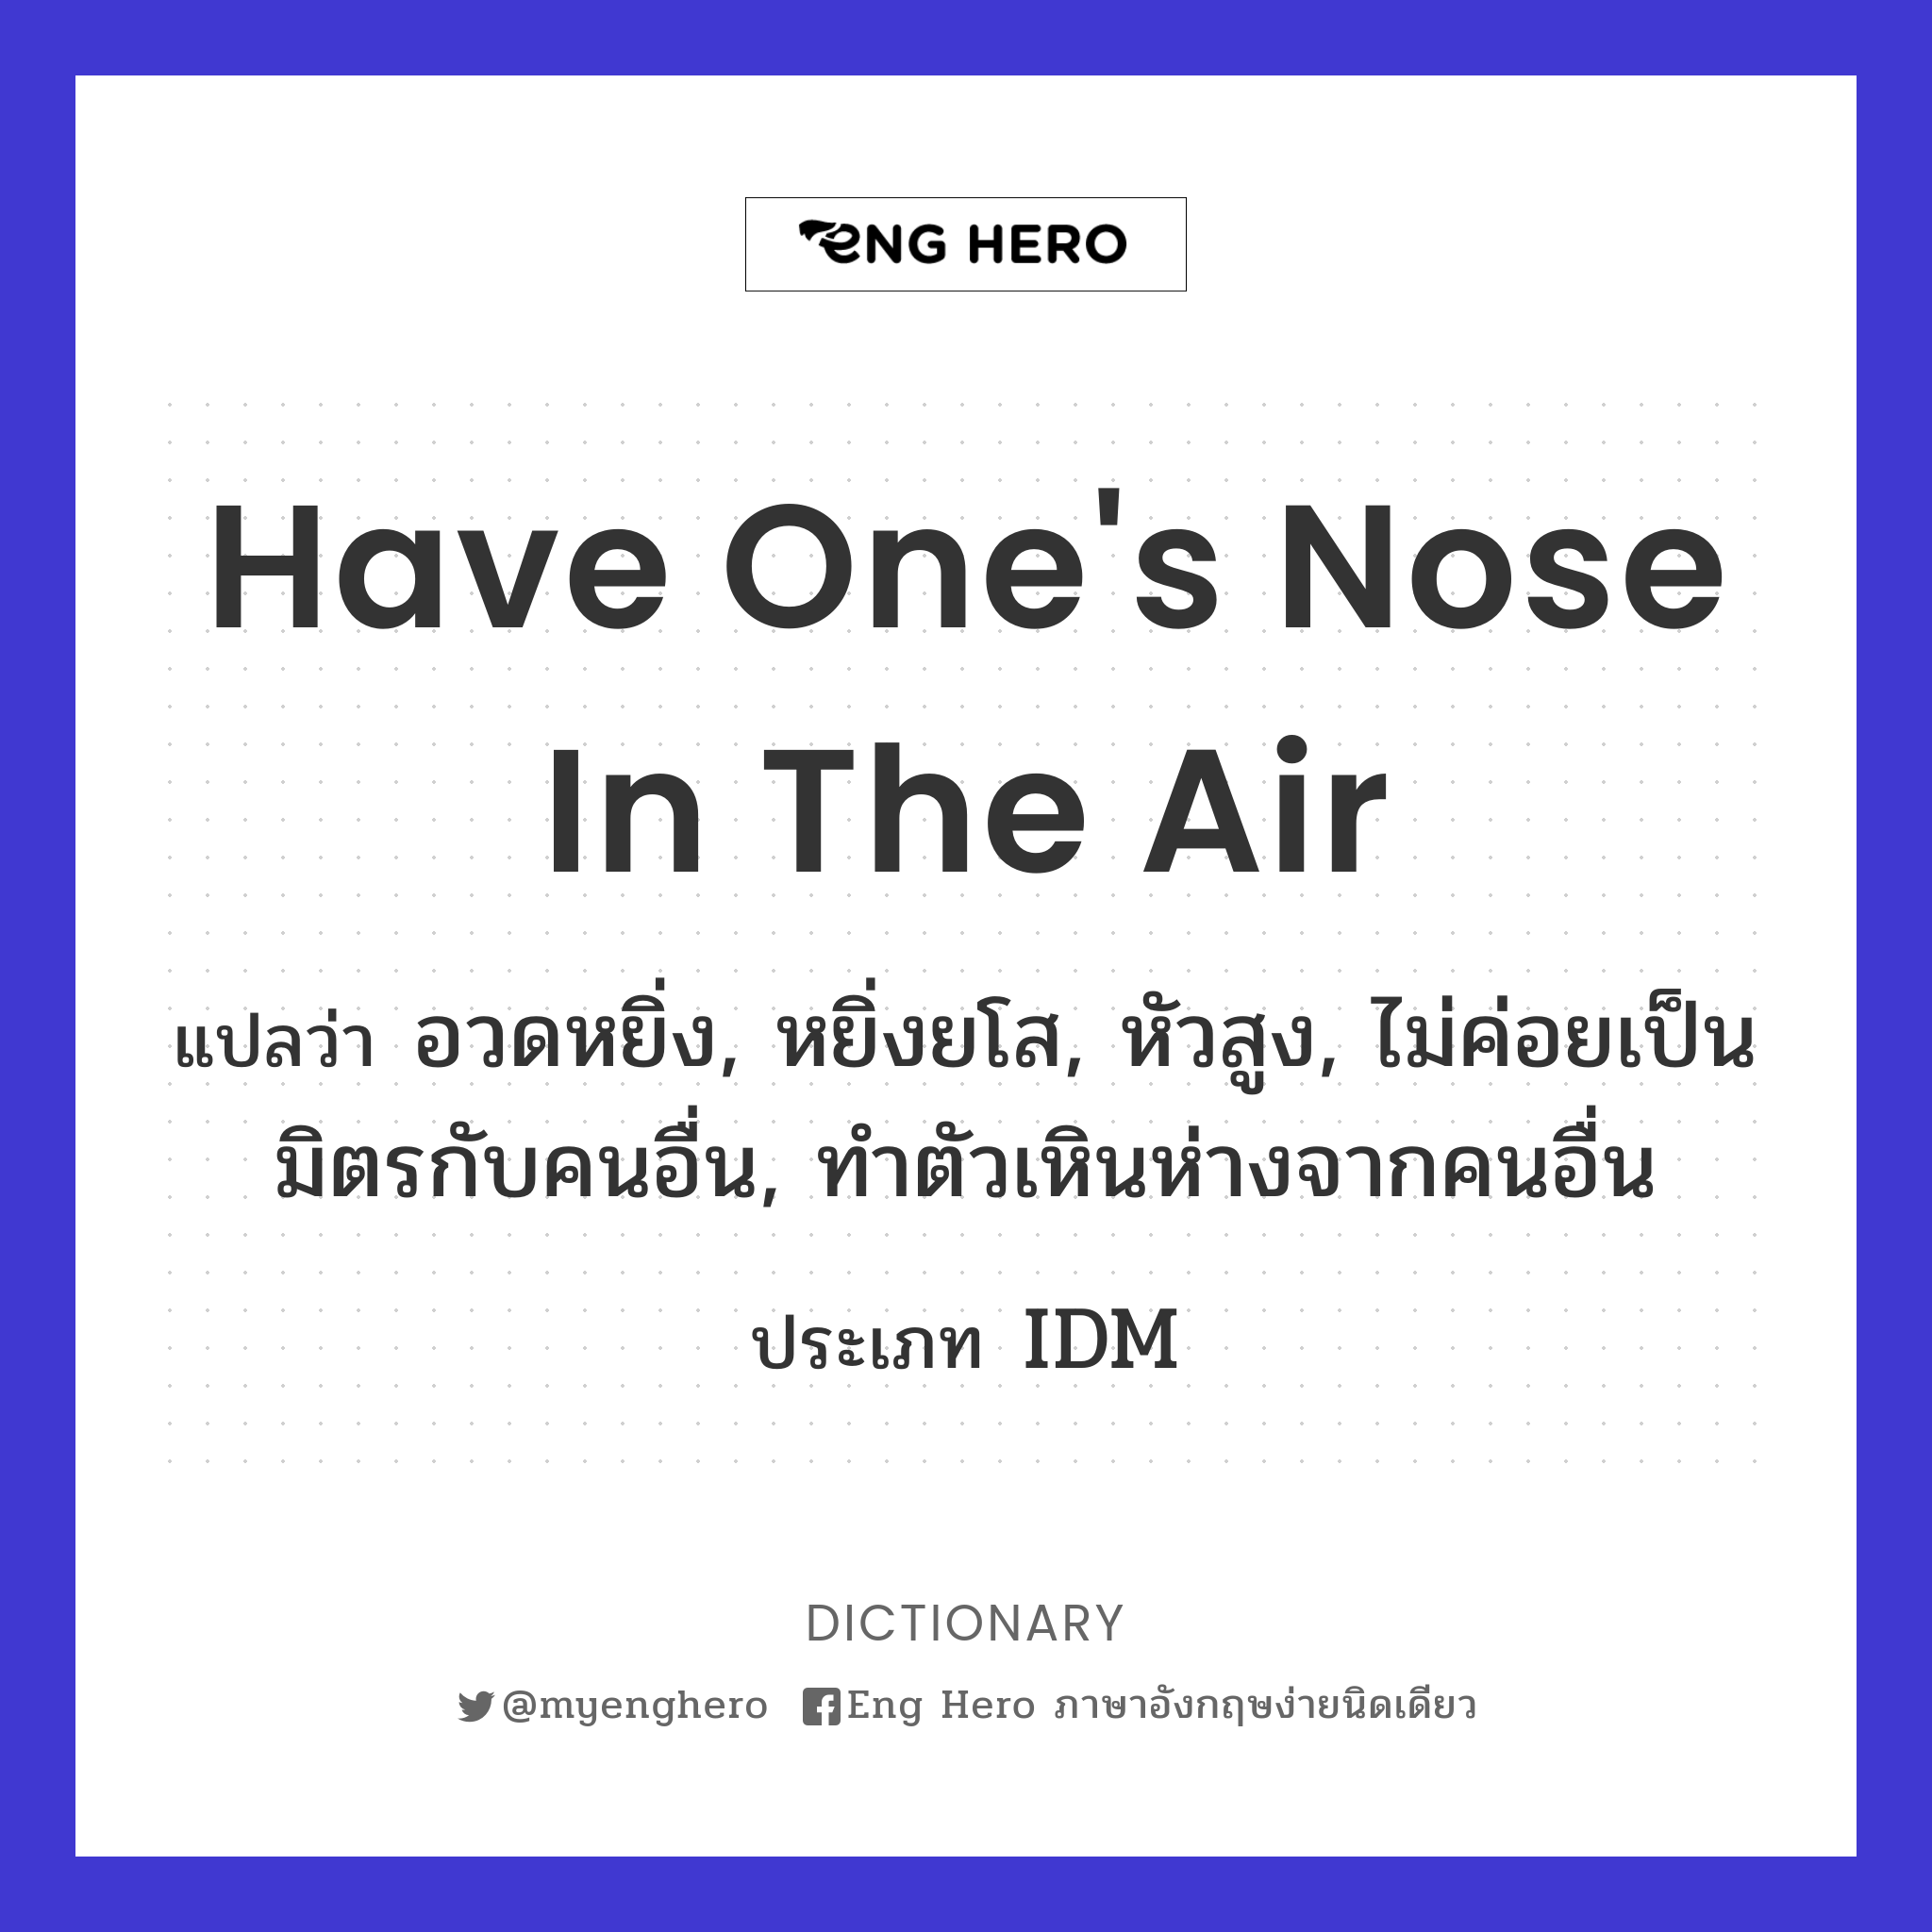 have one's nose in the air